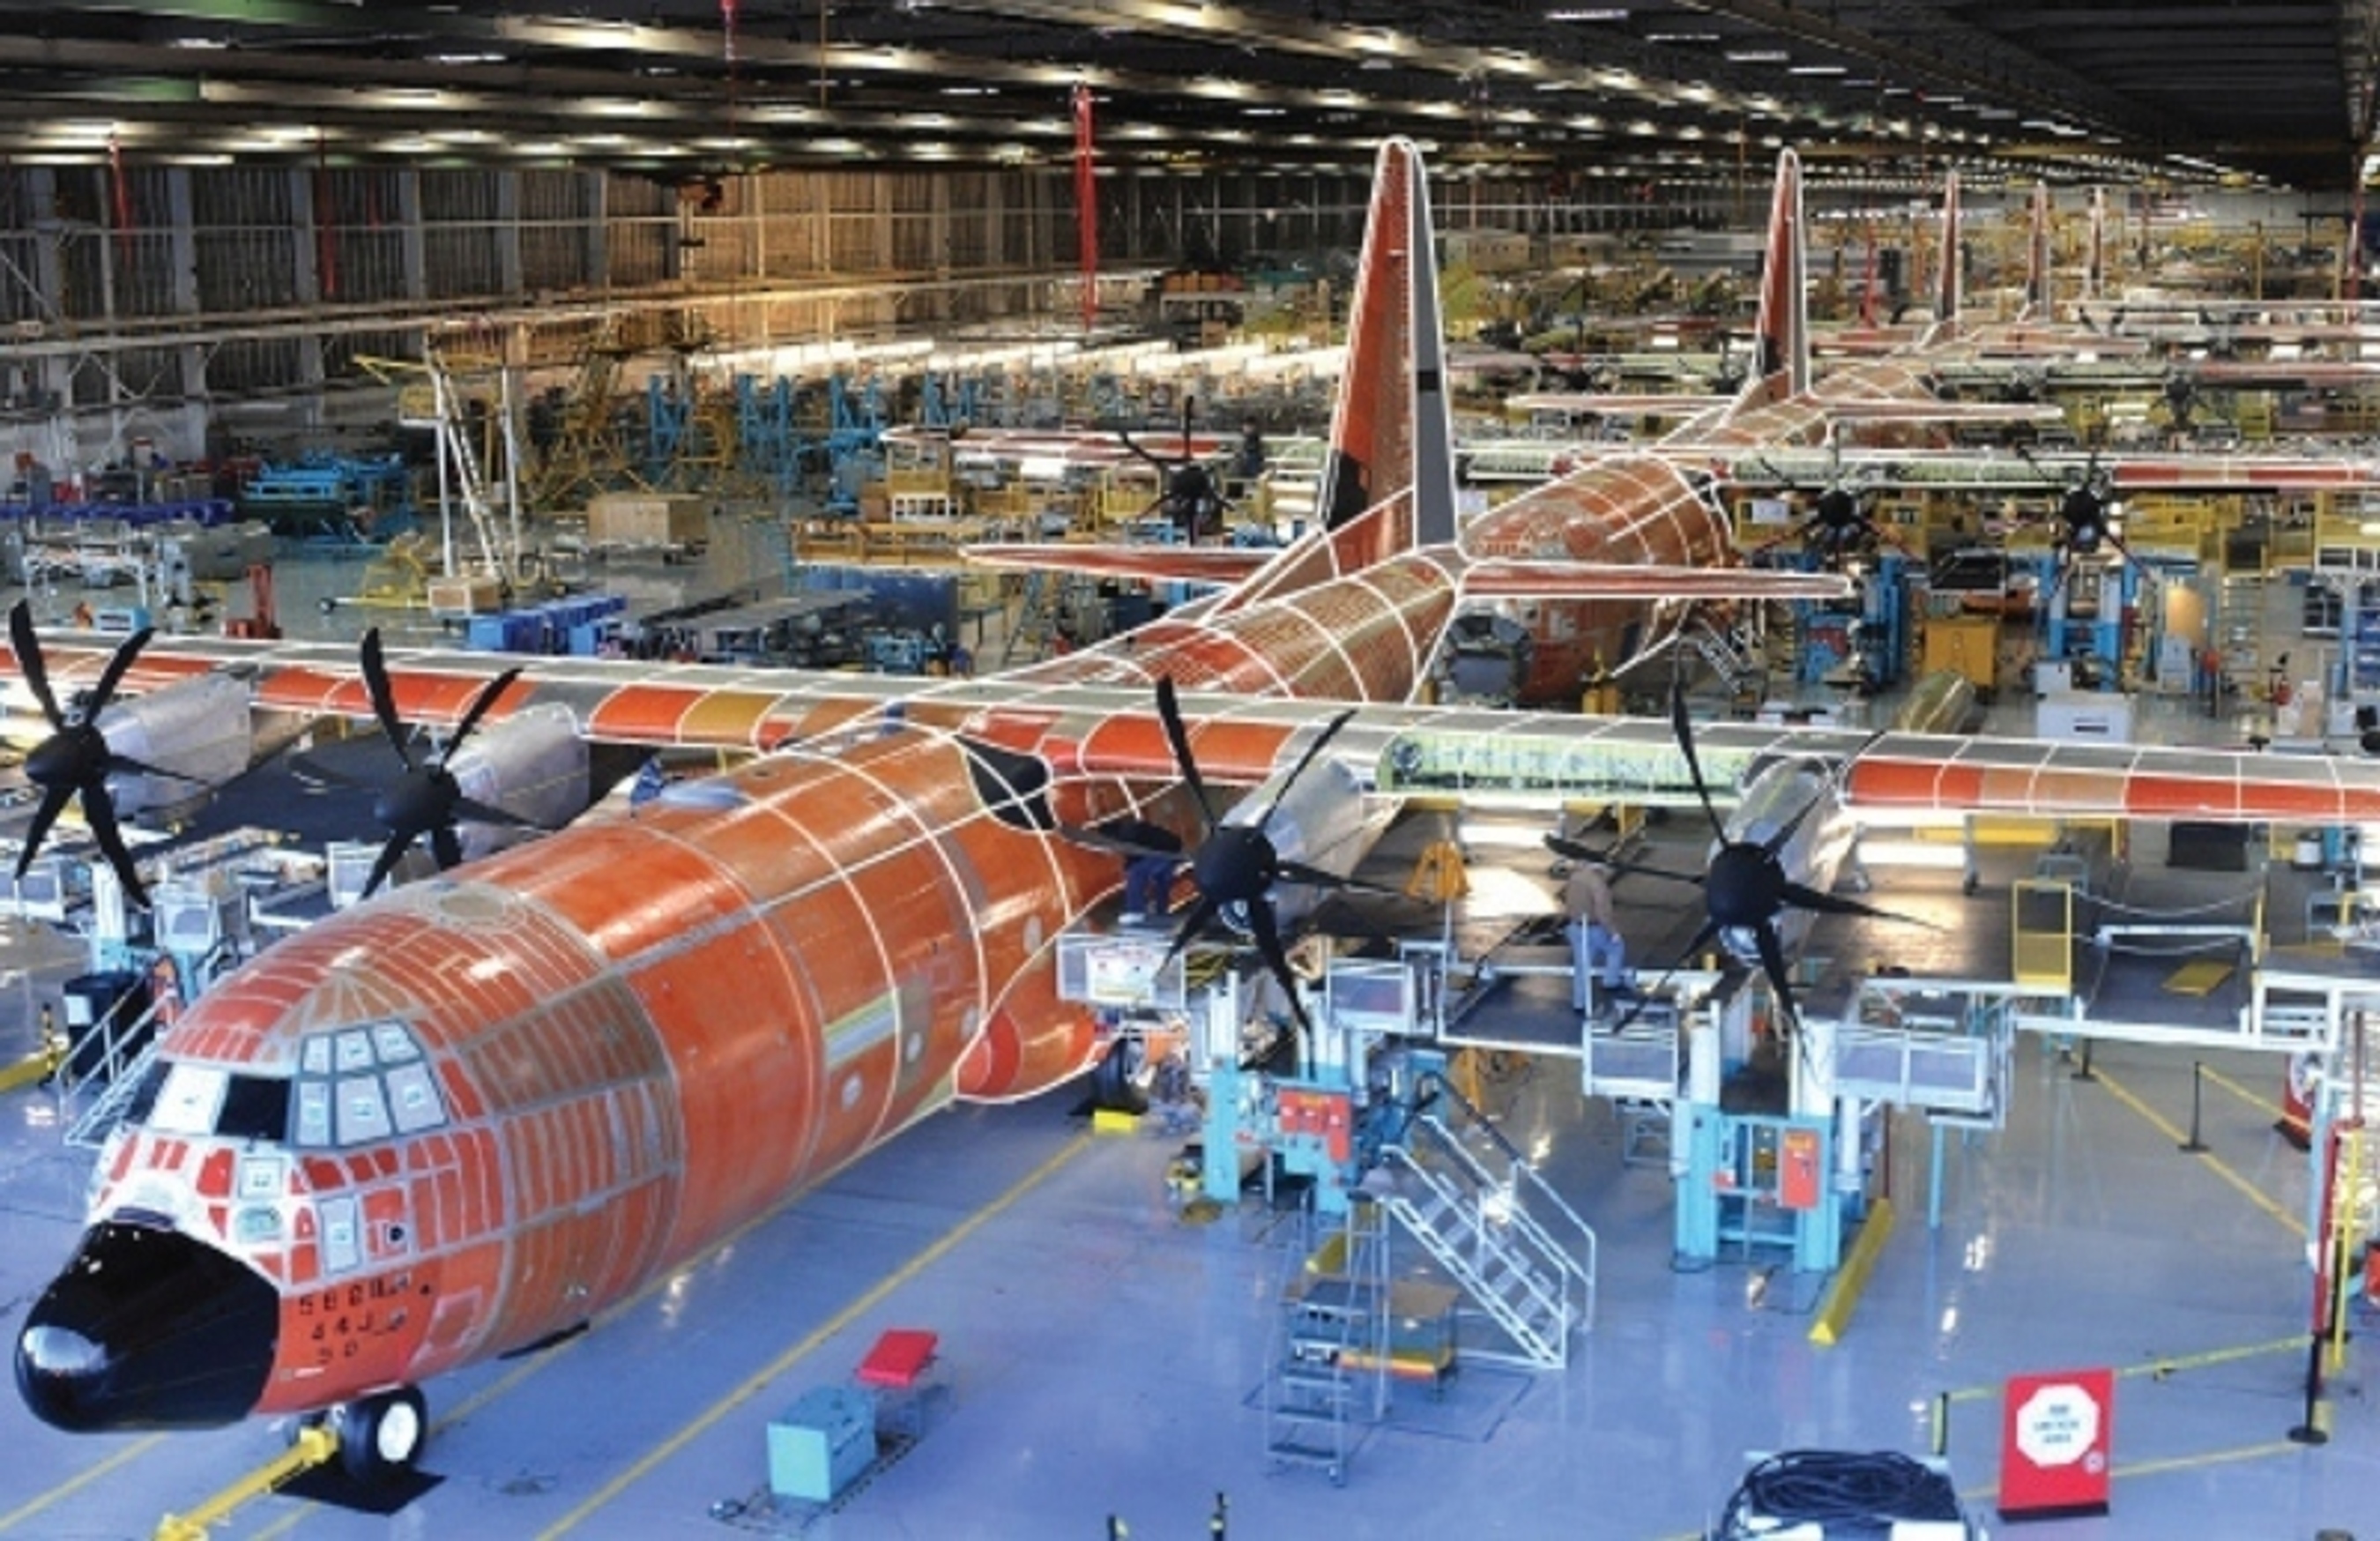 Lockheed Martin Aeronautics’ C-130J Super Hercules production line at the Marietta, Georgia facility. The C-130J incorporates state-of-the-art technology, which reduces labor requirements, lowers operating and support costs, and provides life cycle cost-savings over earlier C-130 models. (PRNewsFoto/Lockheed Martin)